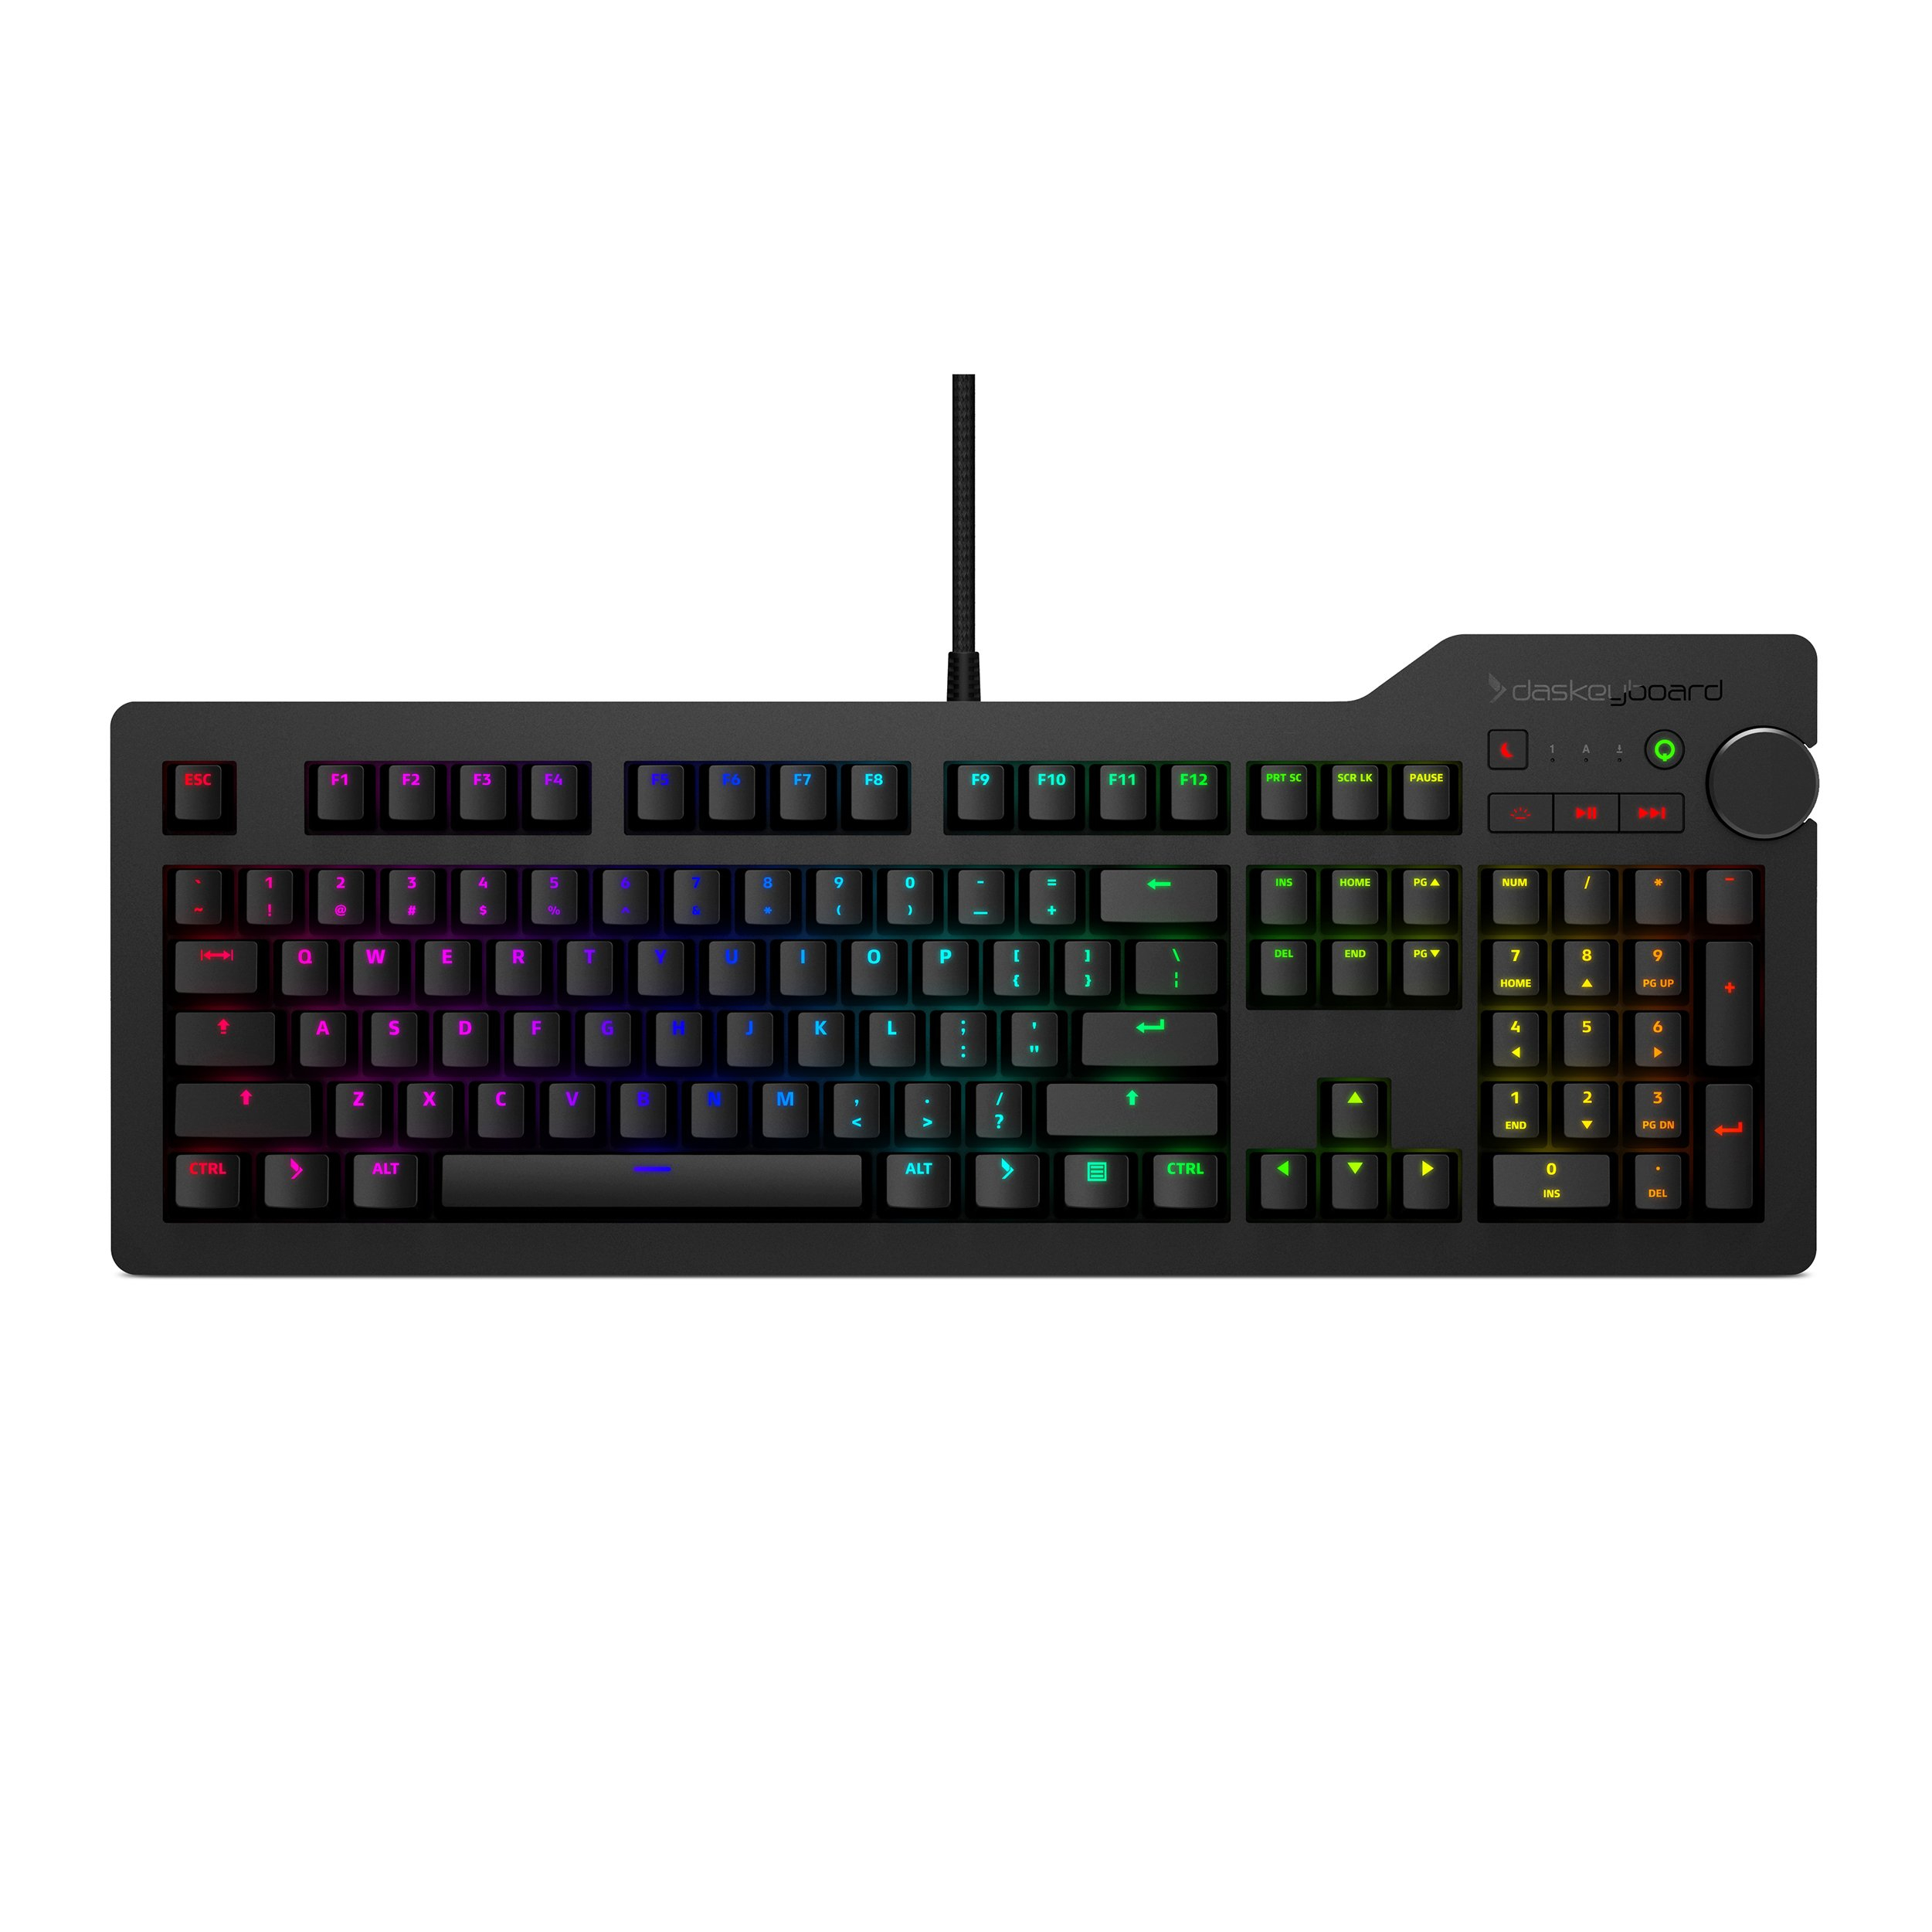 Keyboards for PC